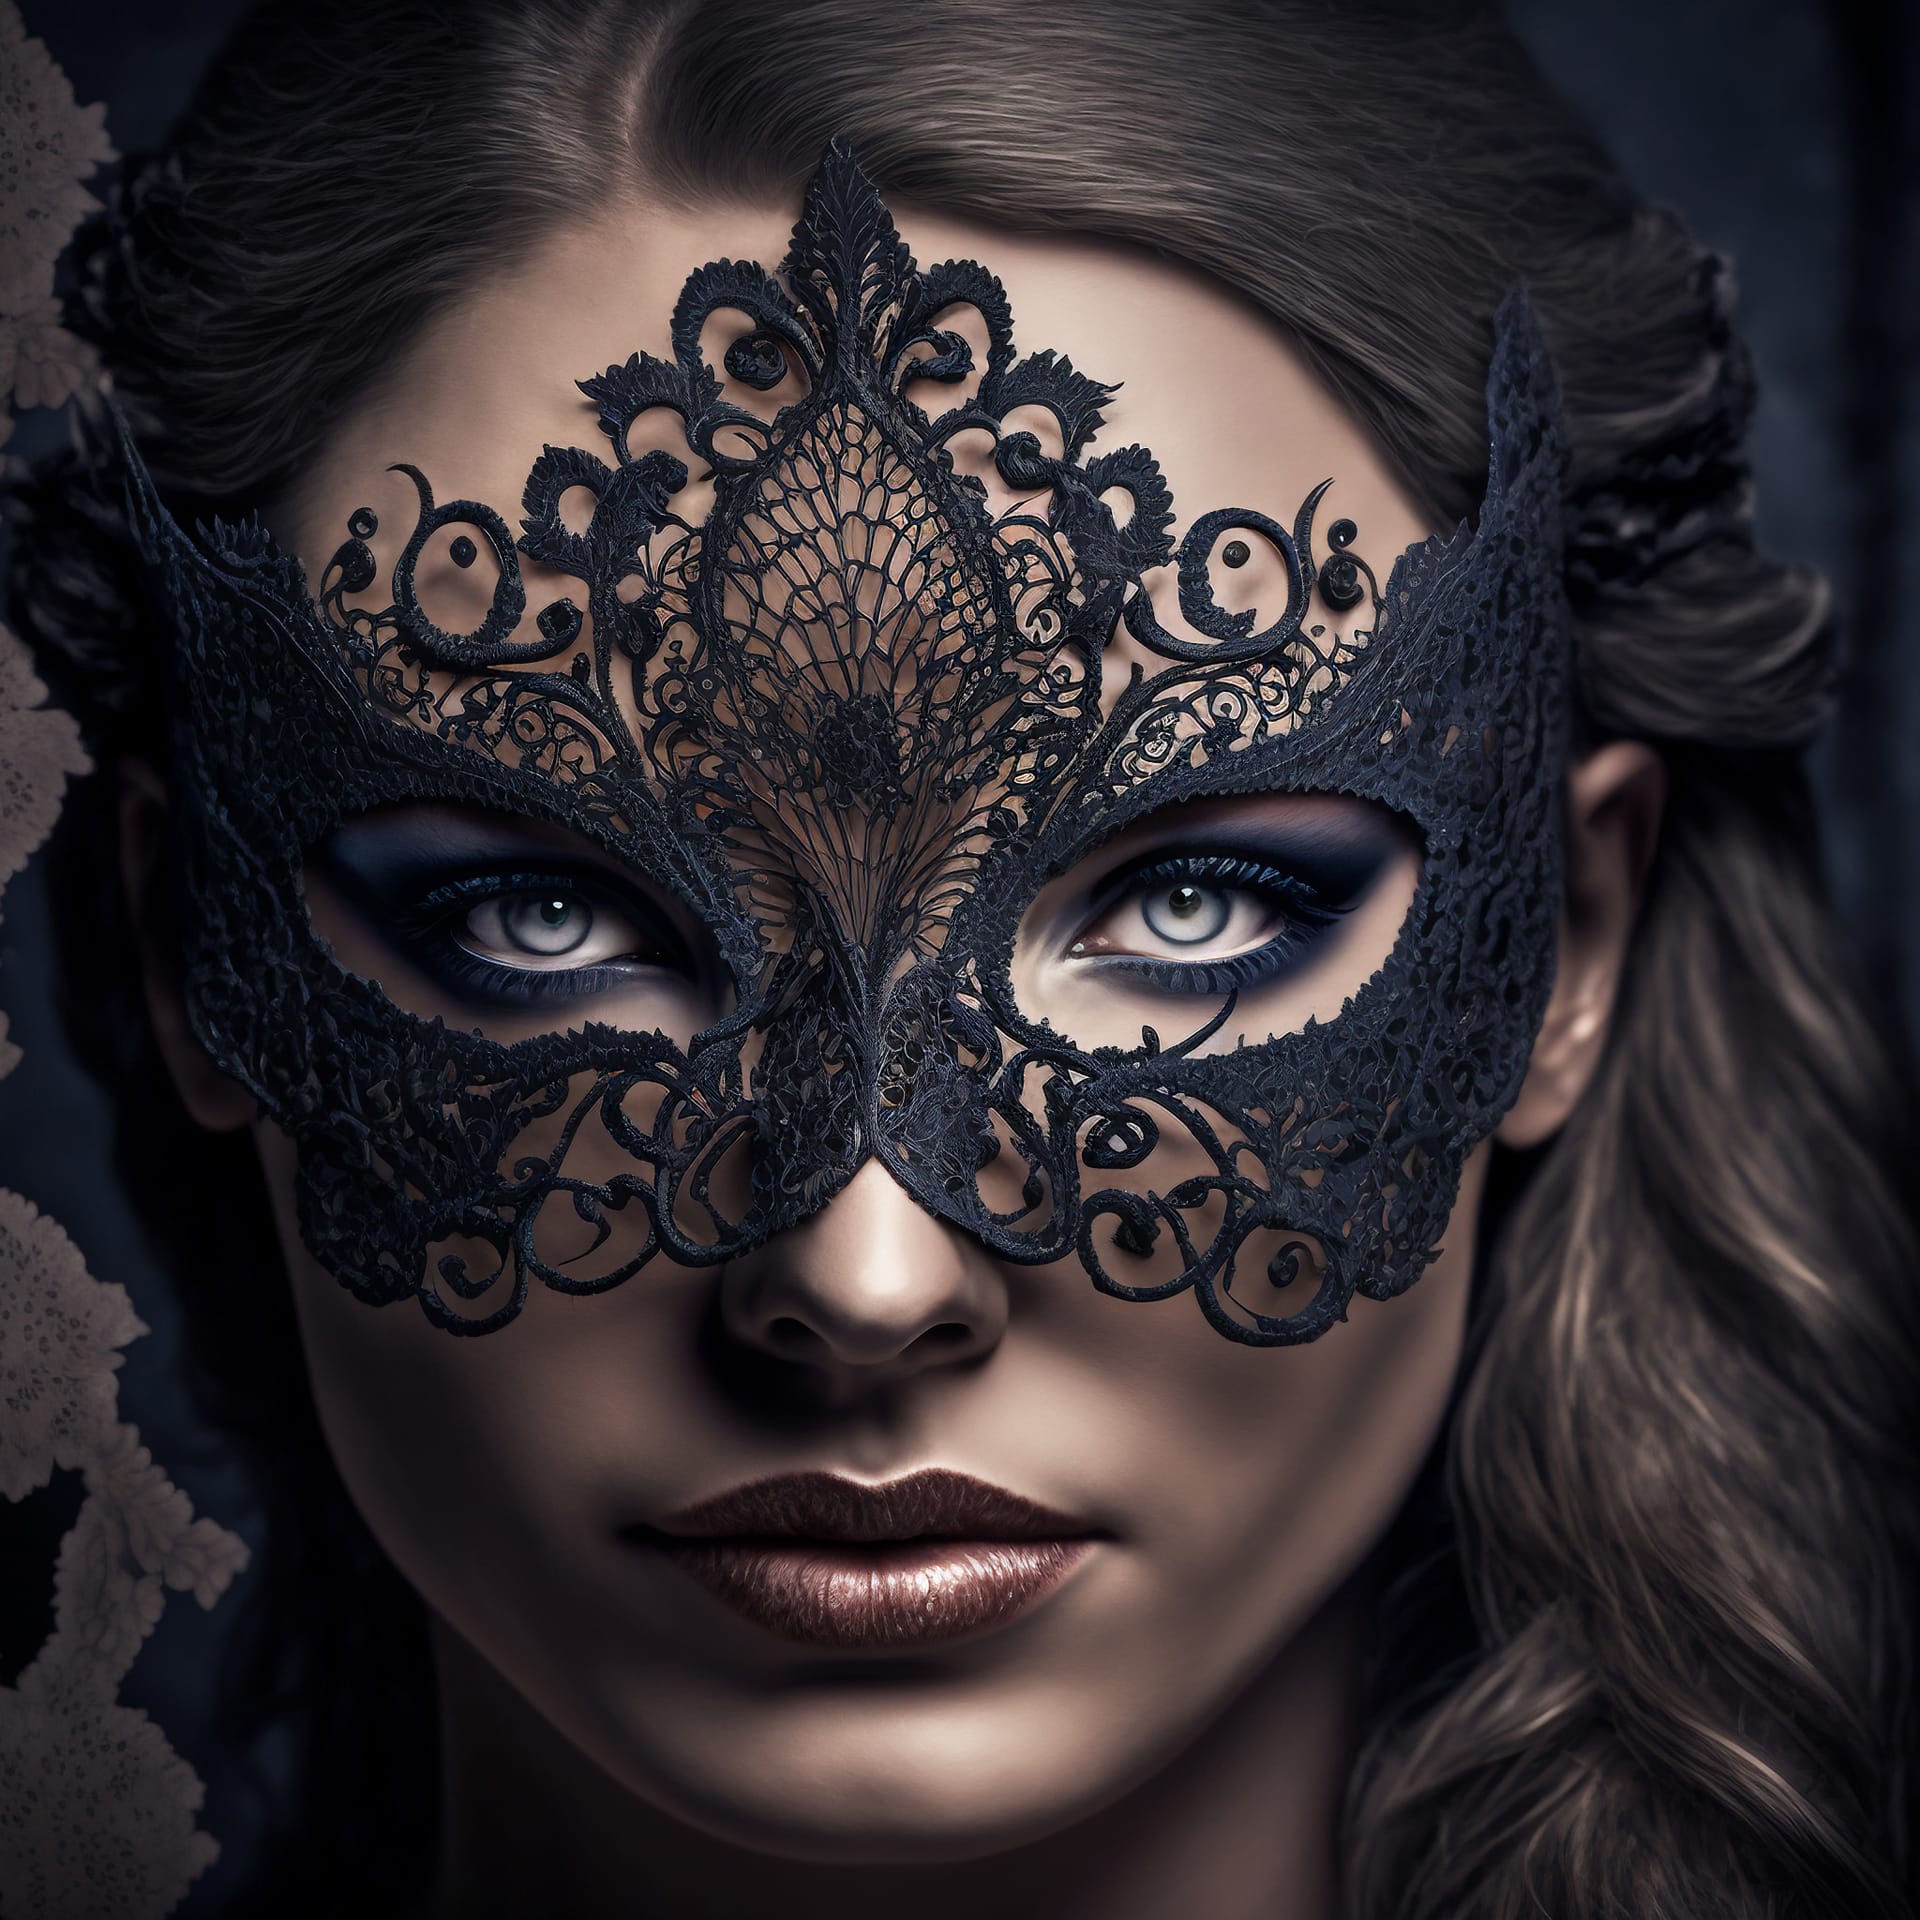 Digital painting beautiful woman with black lace mask her eyes woman profile picture